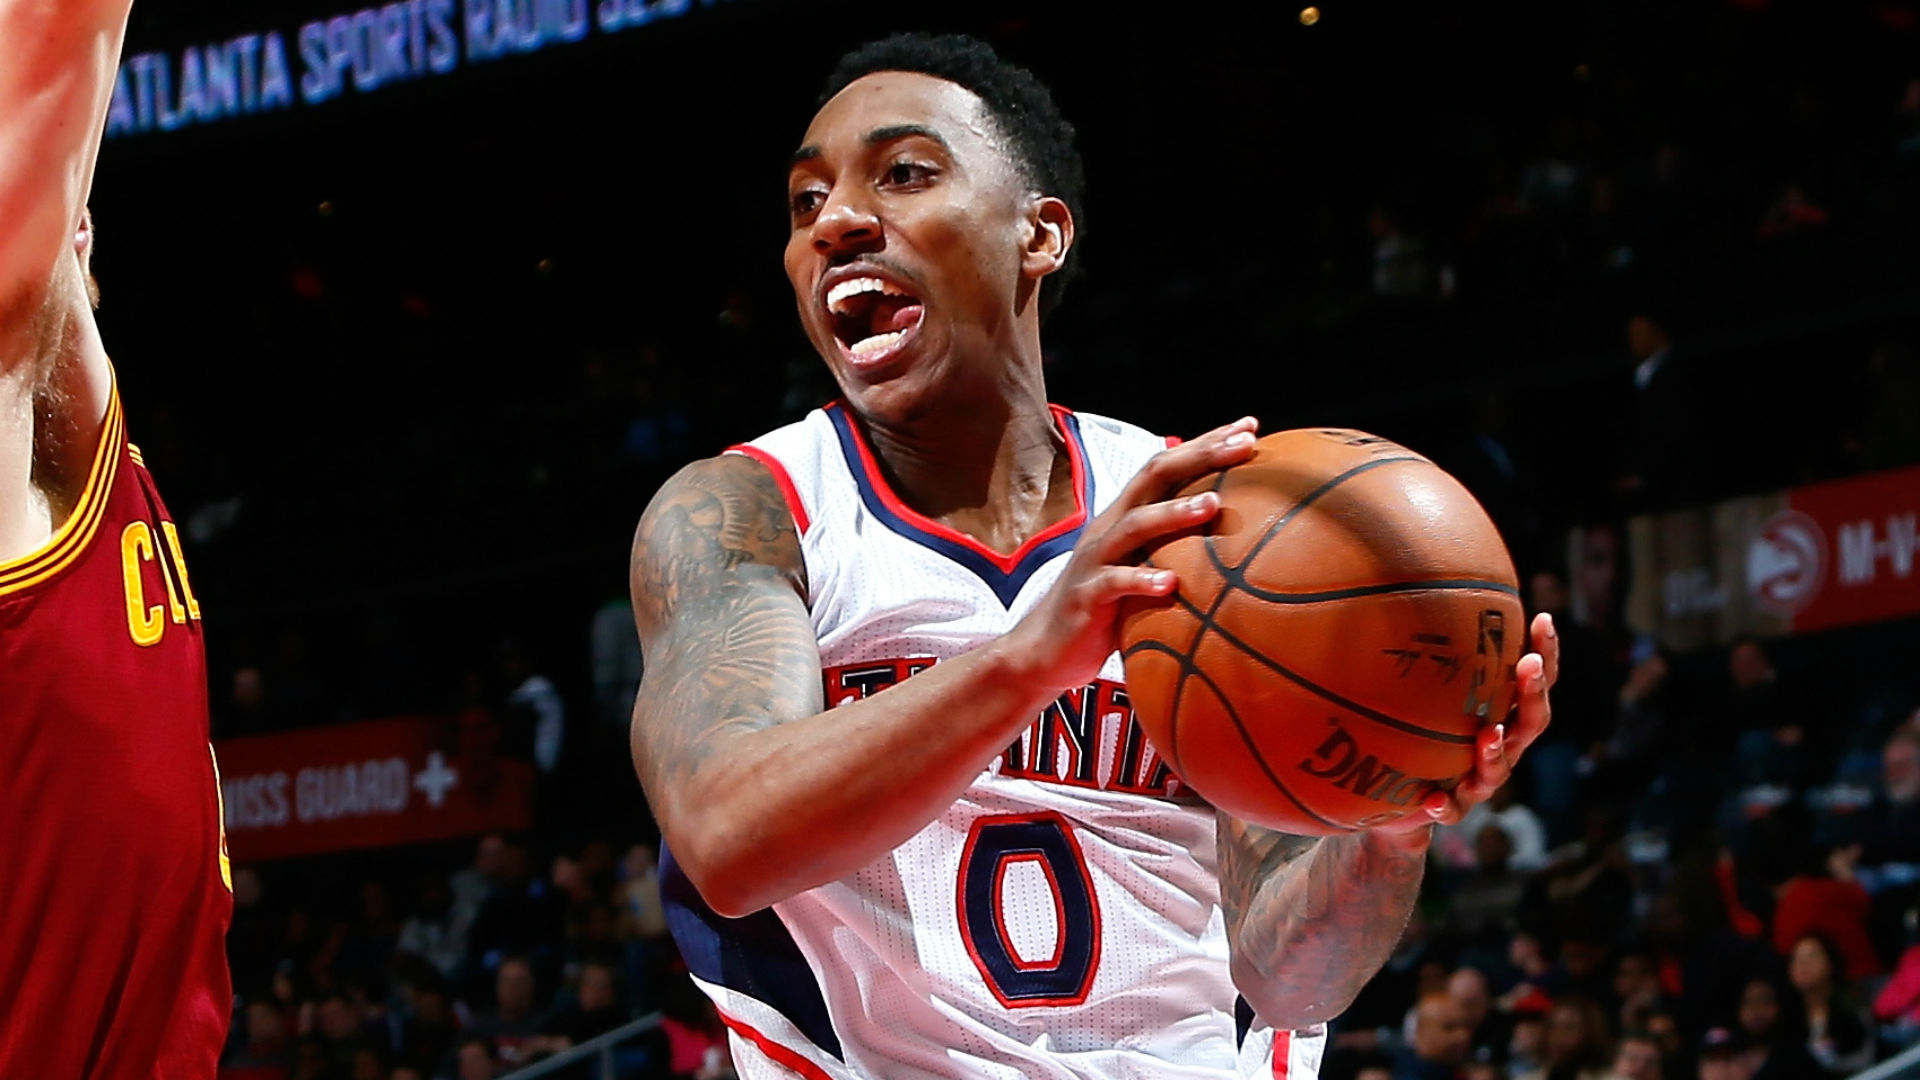 Jeff Teague Wallpaper High Resolution And Quality